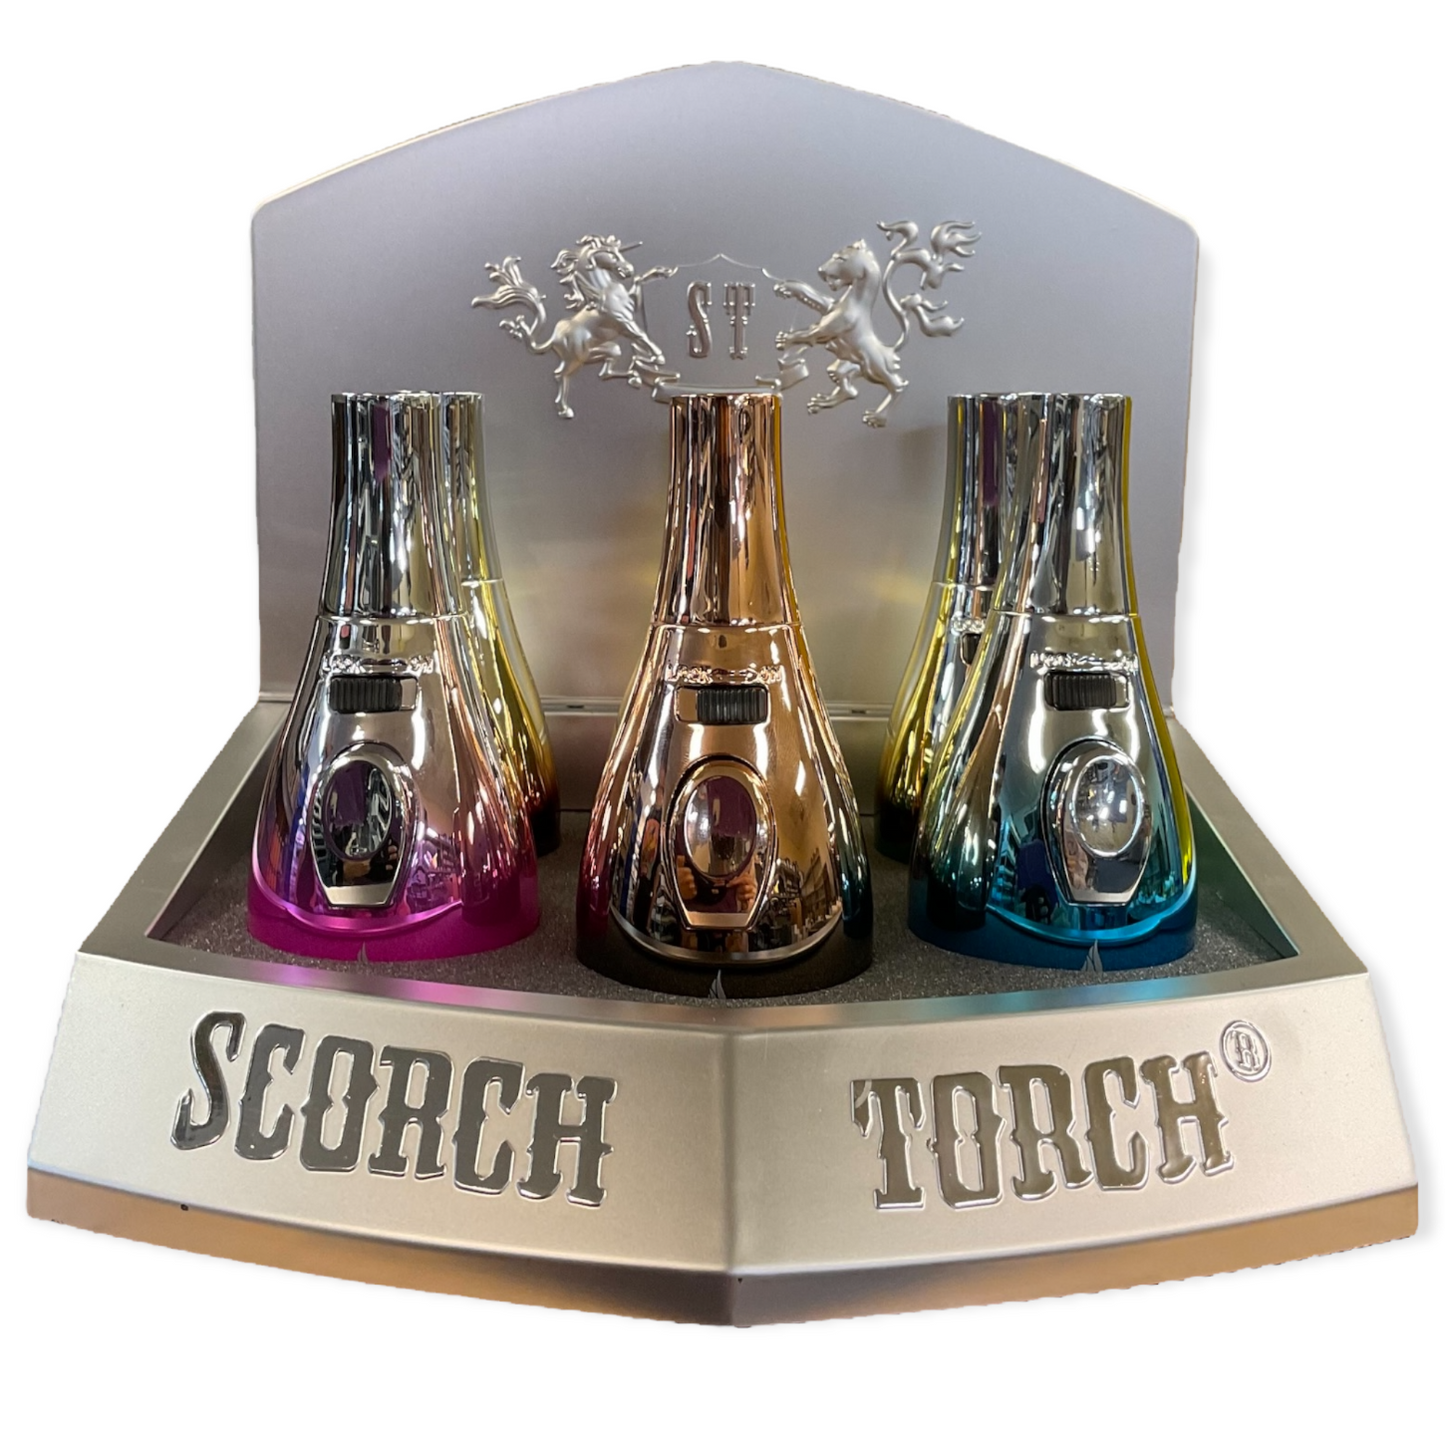 Scorch Torch - Ombre Lamp 6pk Display